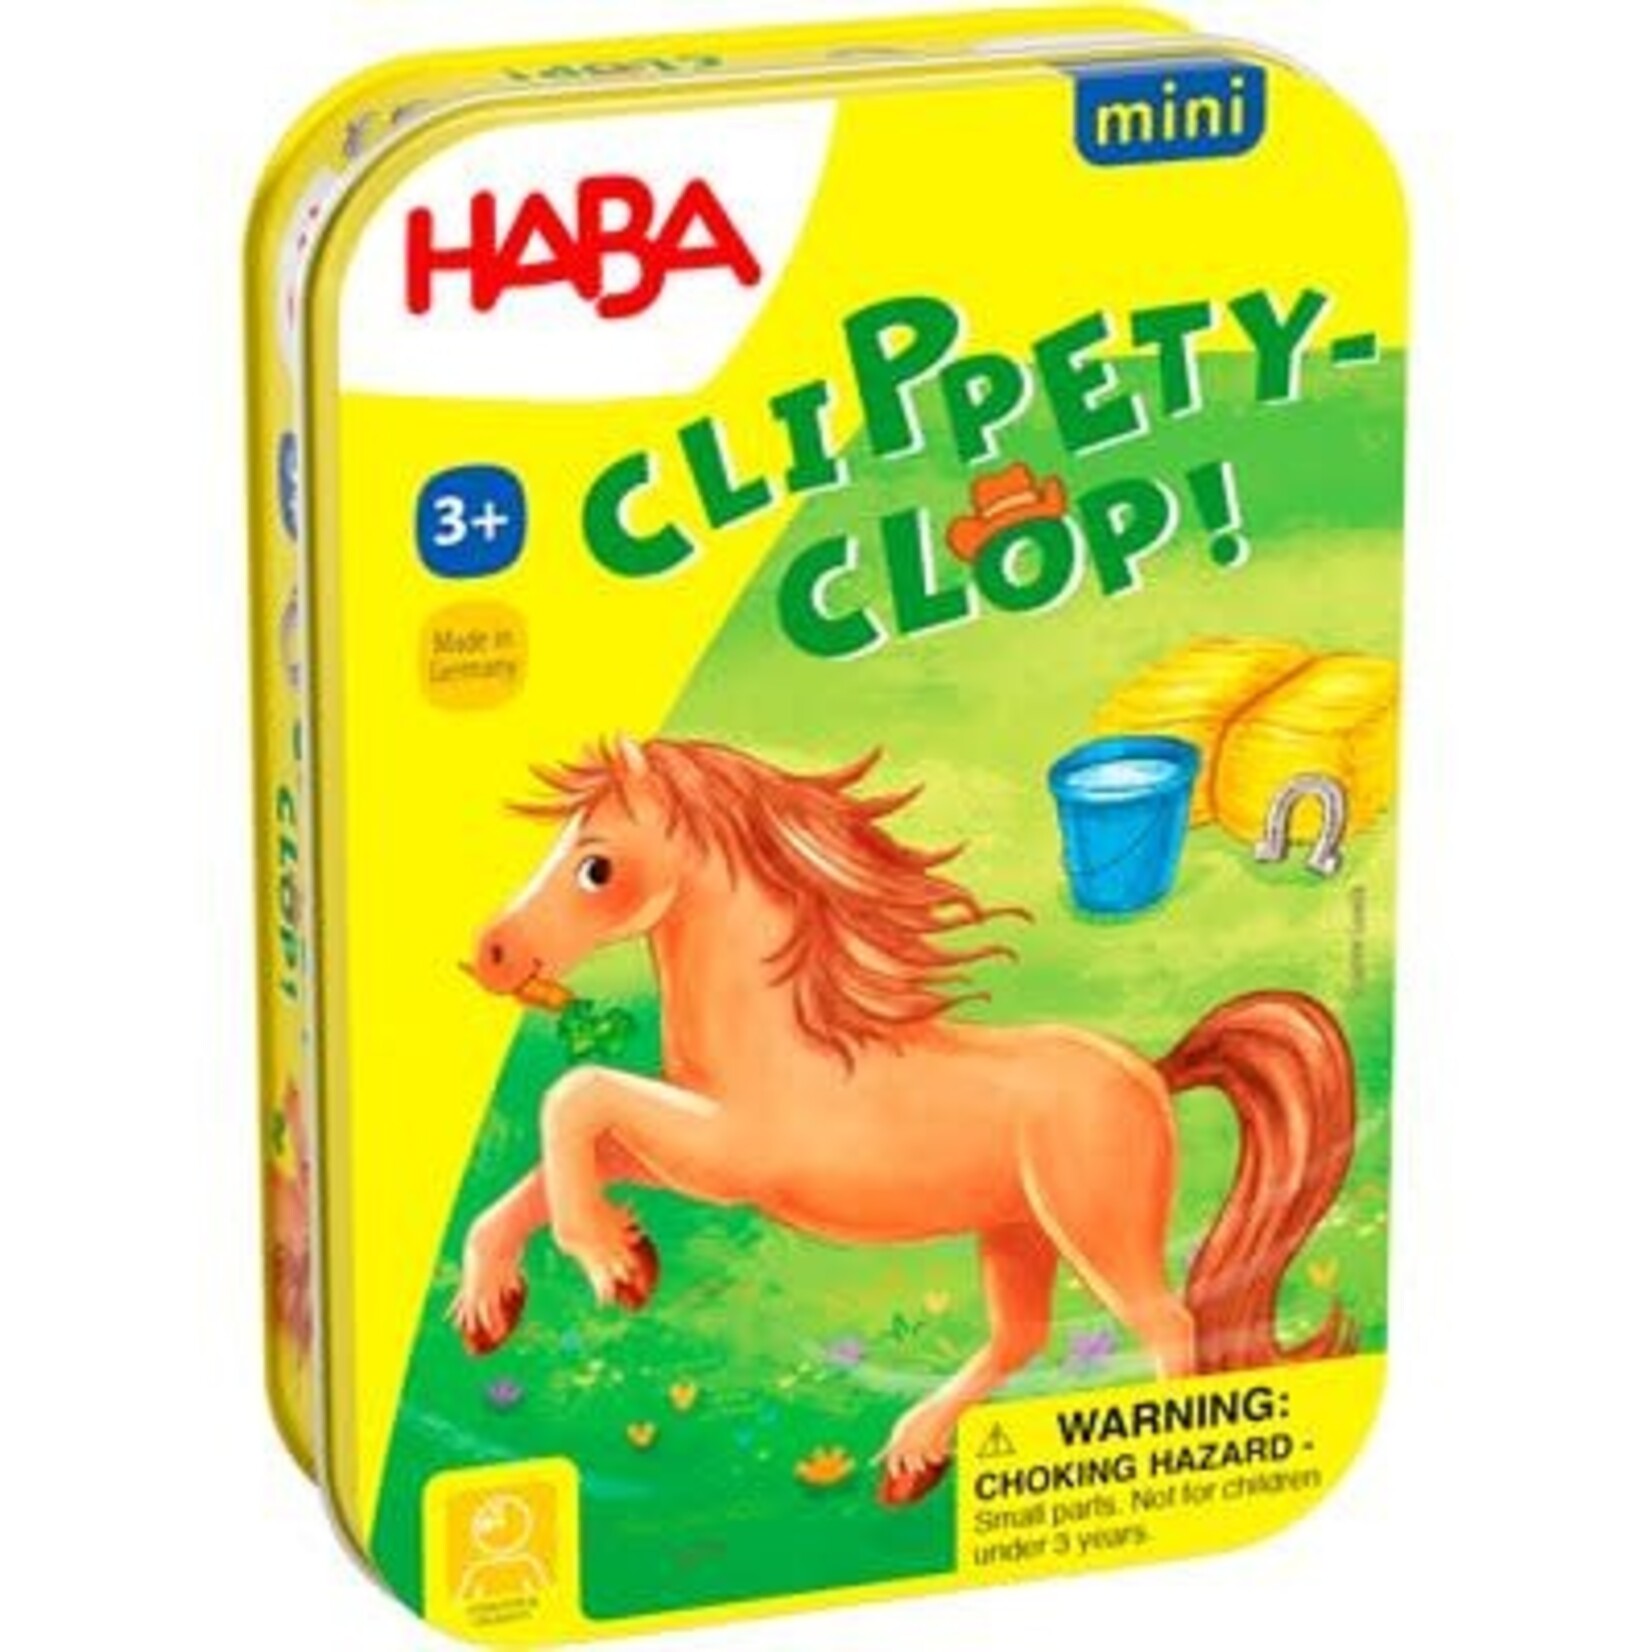 Clippety Clop